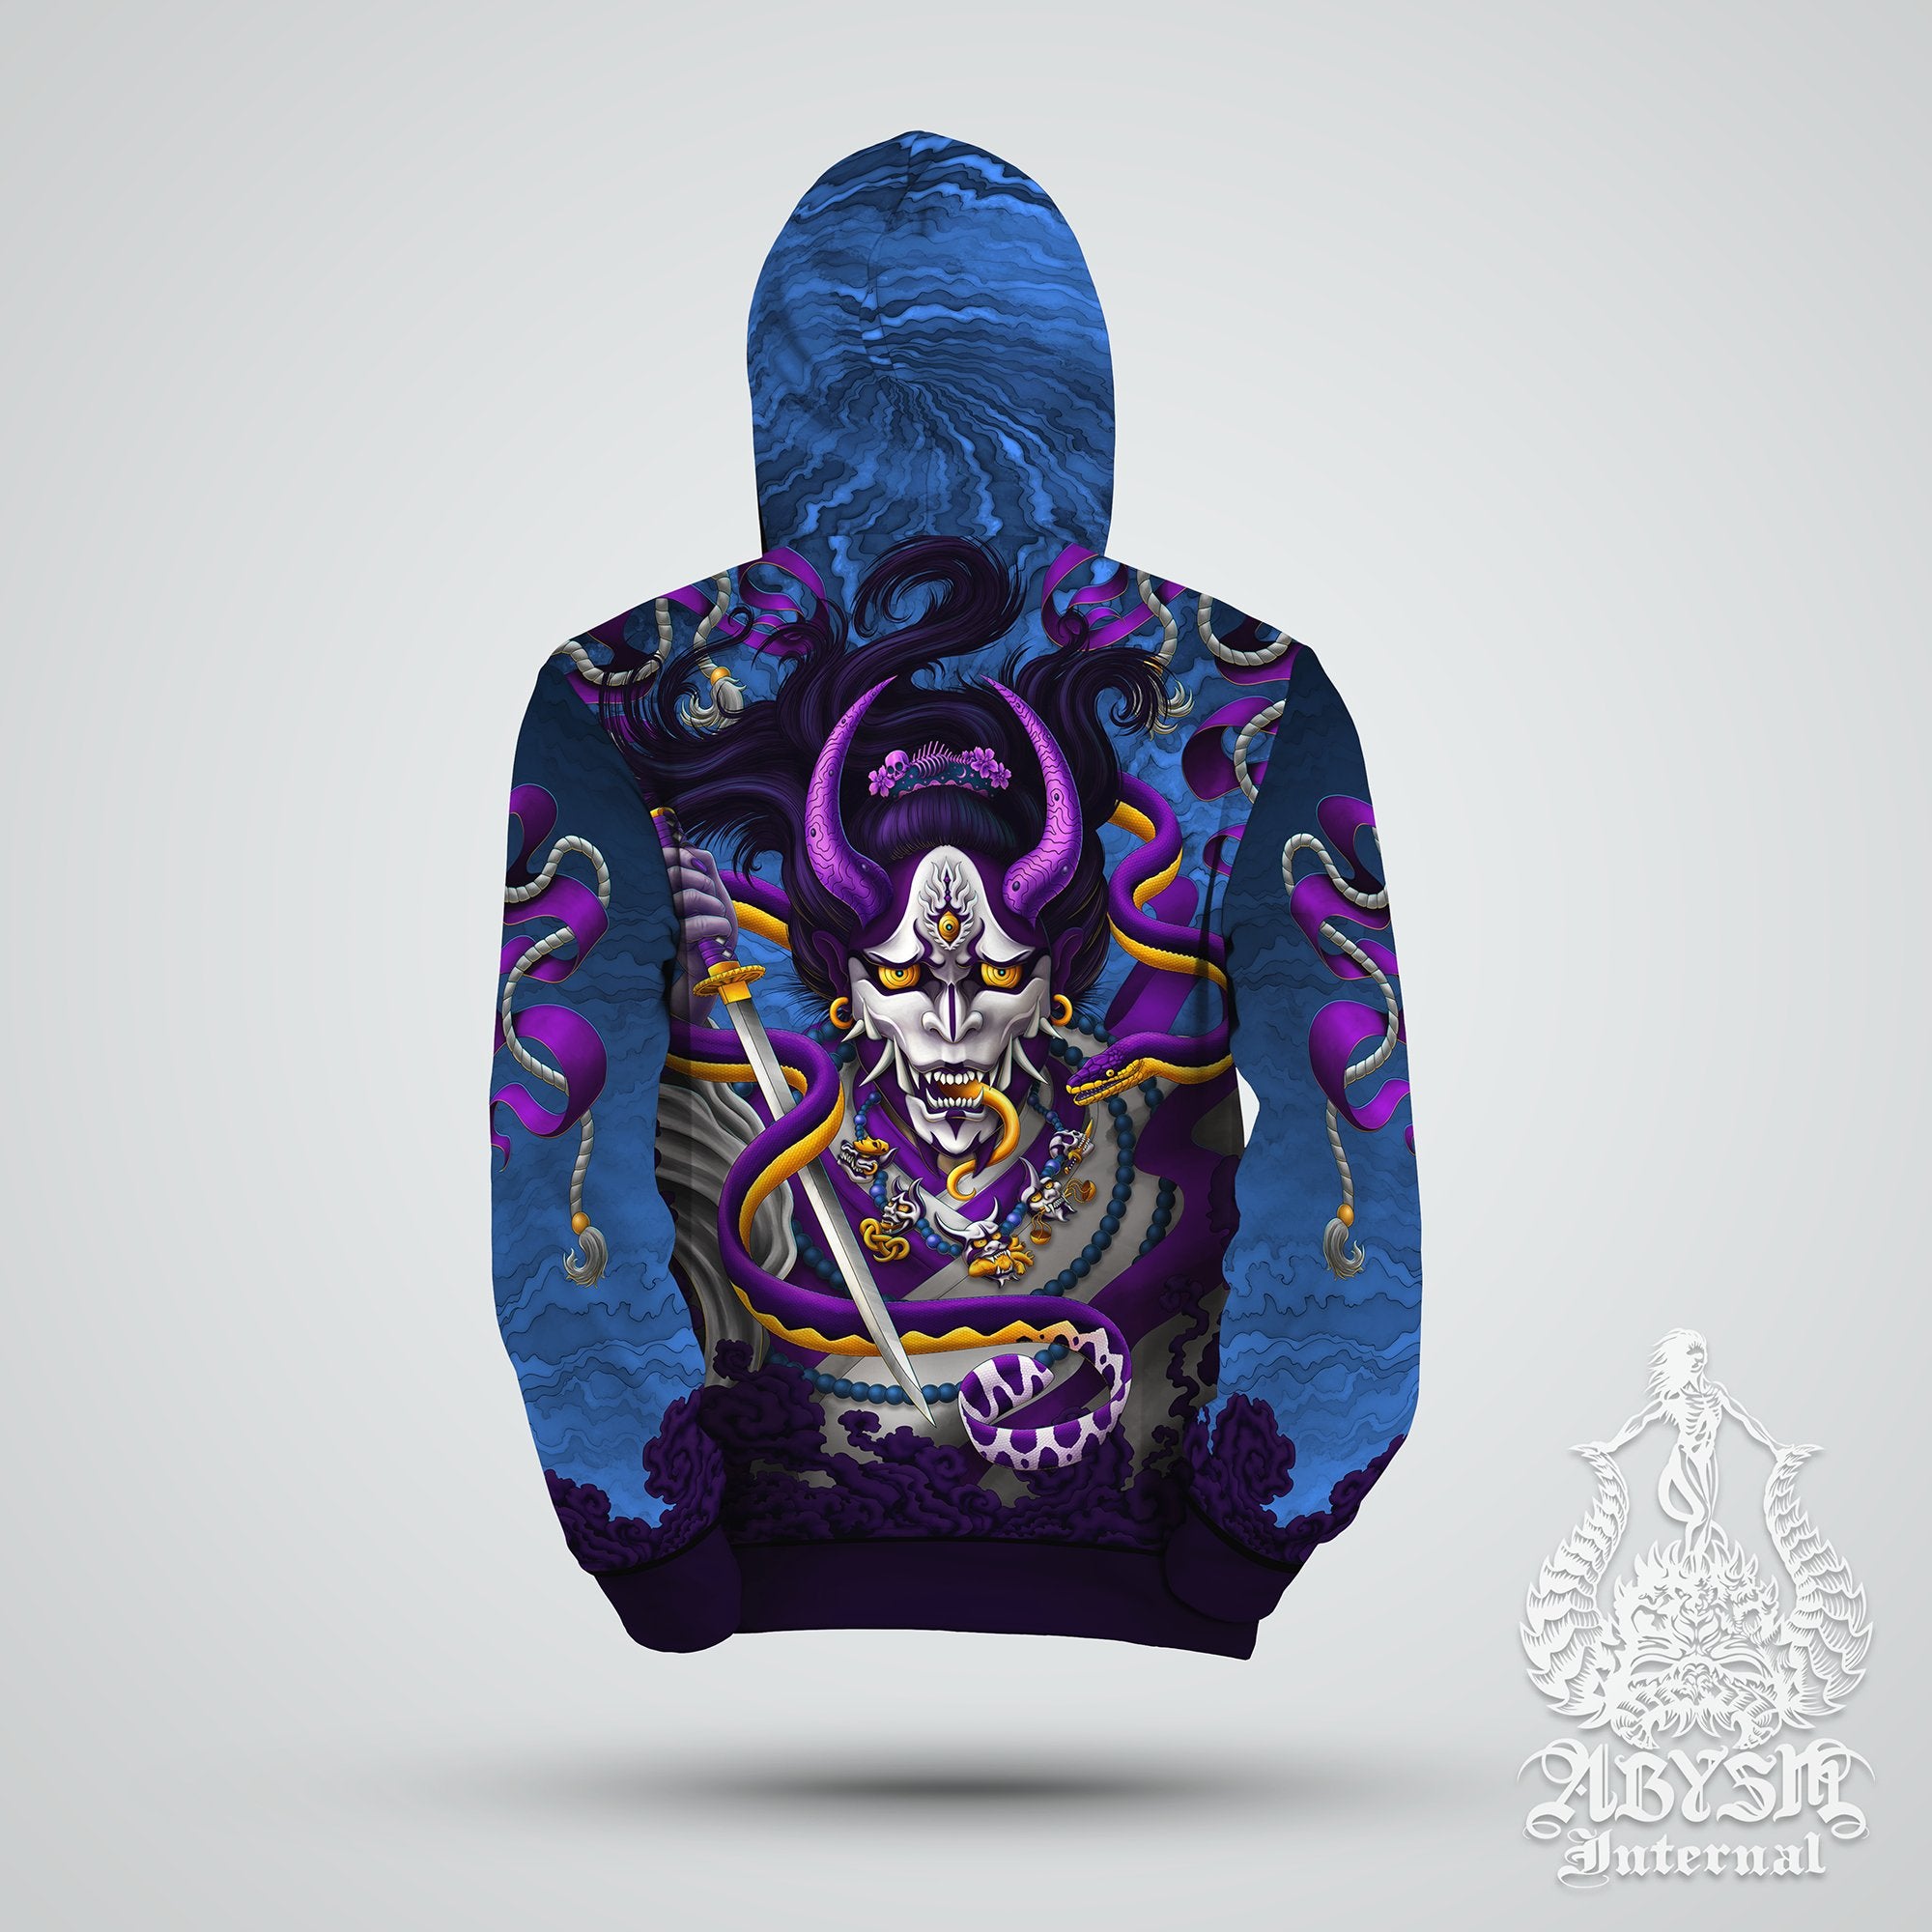 Hannya & Snake Hoodie, Demon Sweater, Anime and Manga Streetwear, Fantasy Street Dancer Outfit, Japanese Oni Pullover, Alternative Clothing, Unisex - Blue and Purple - Abysm Internal